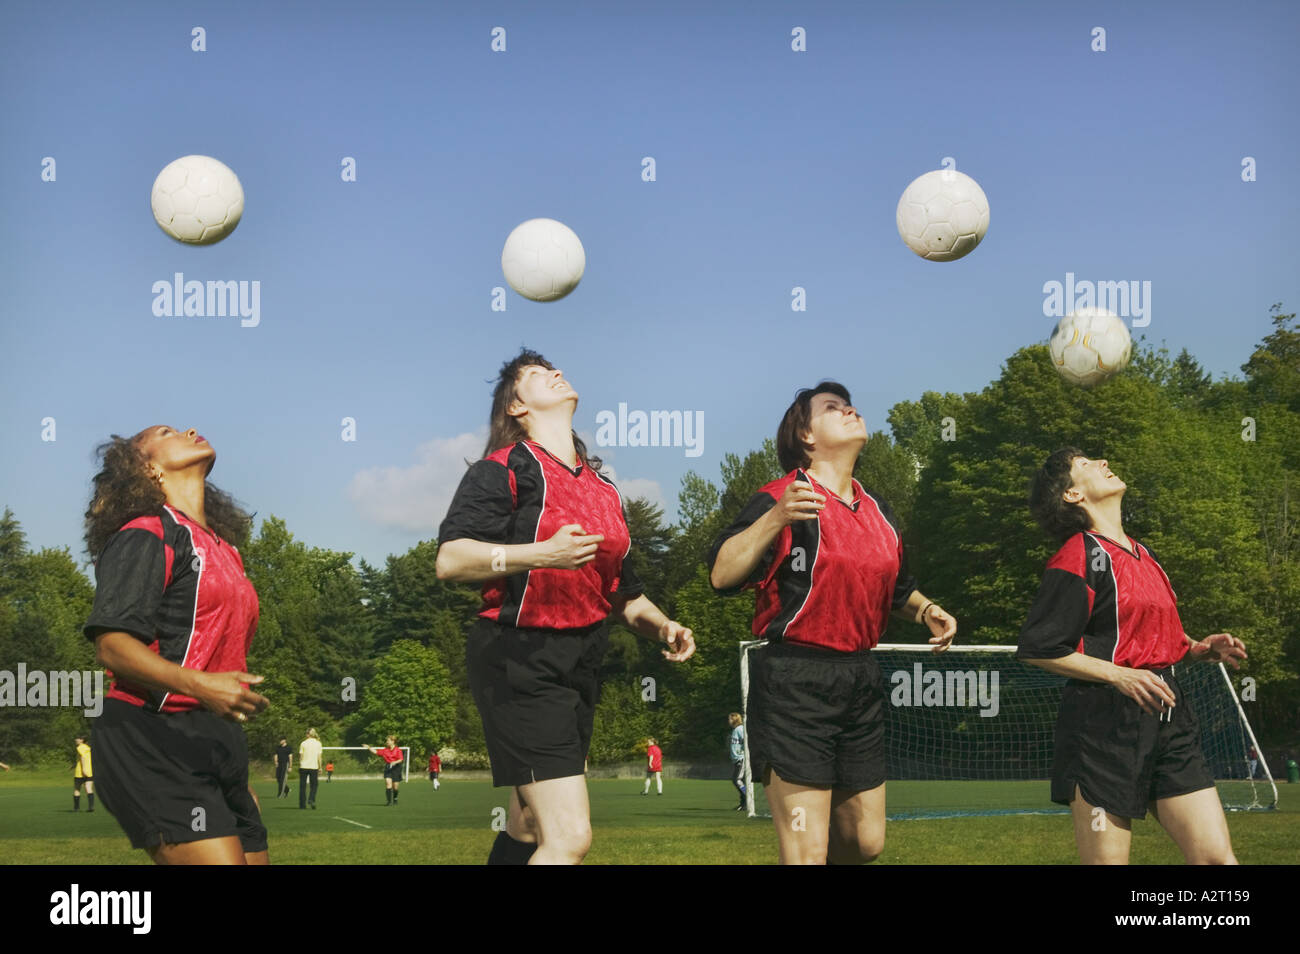 Four young female soccer players heading balls Stock Photo